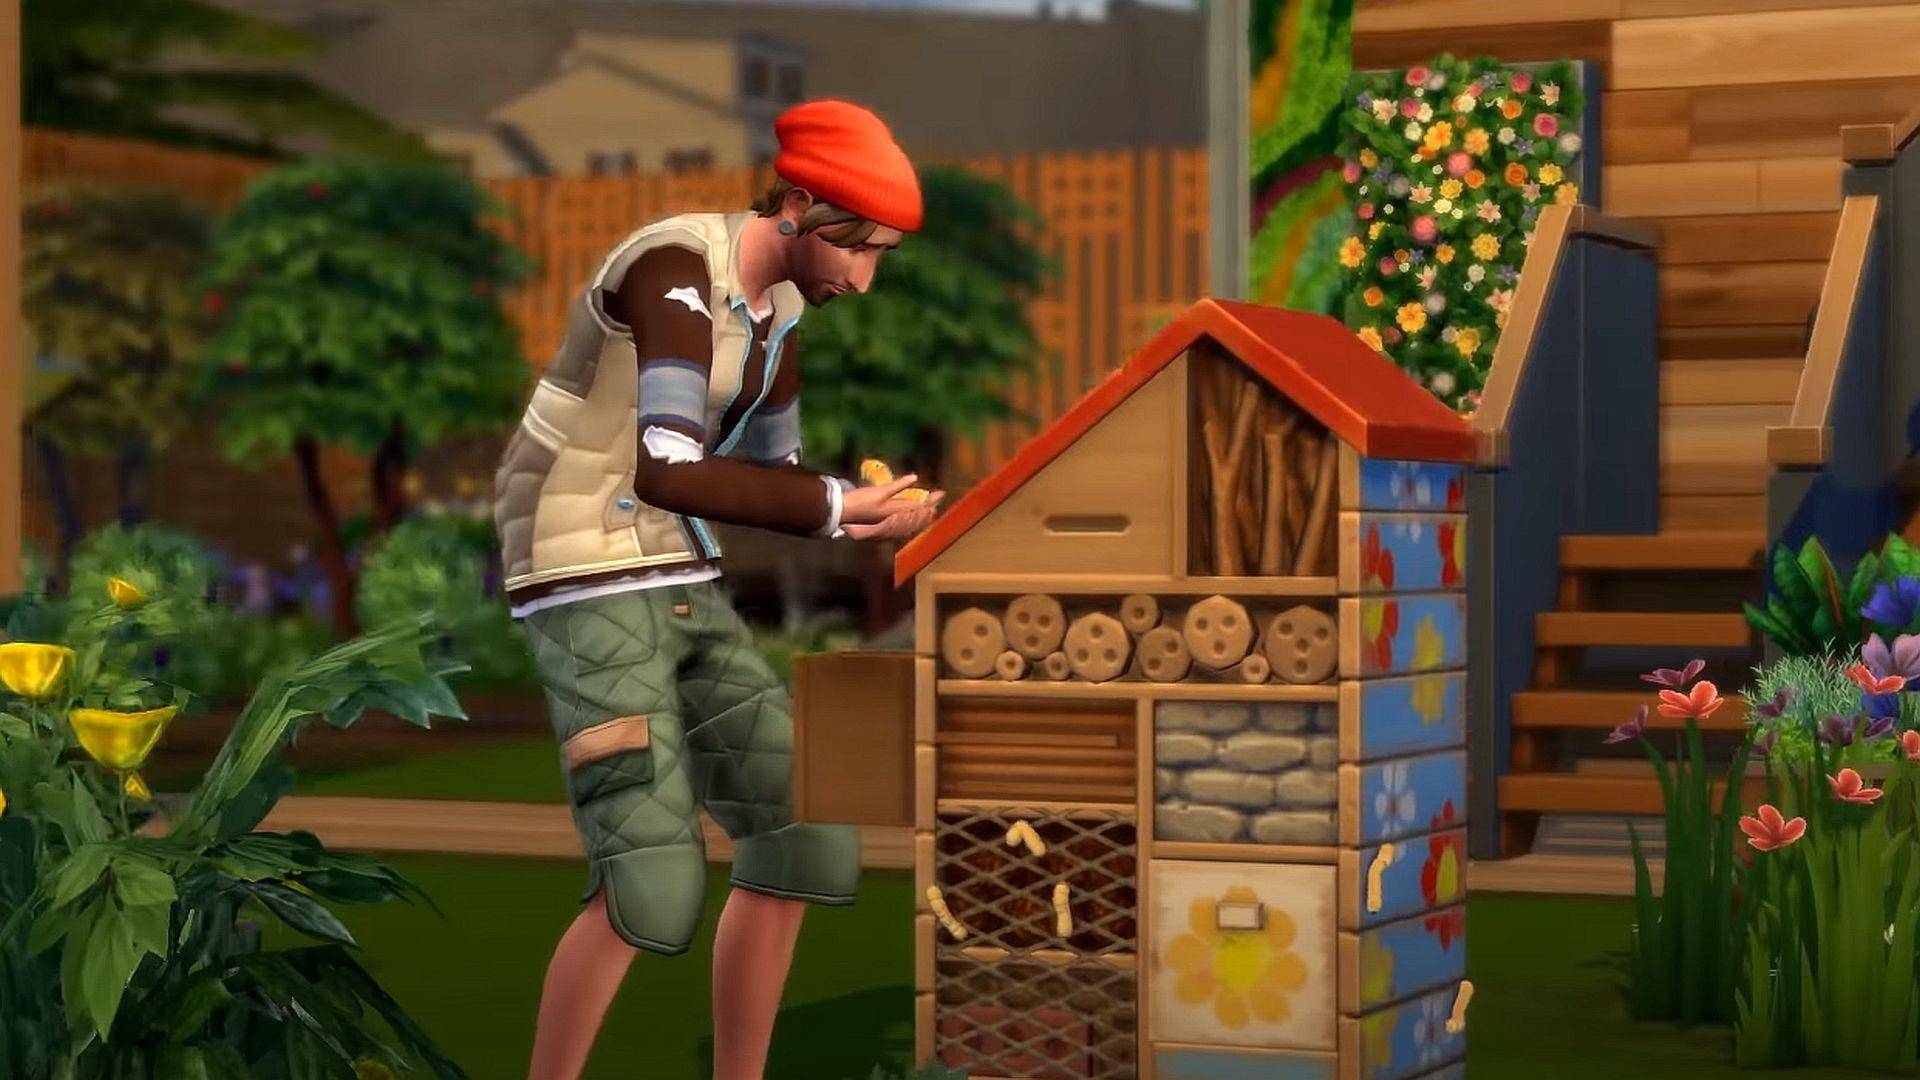 A little more about The Sims 4 - Eco Lifestyle has been revealed in a new video